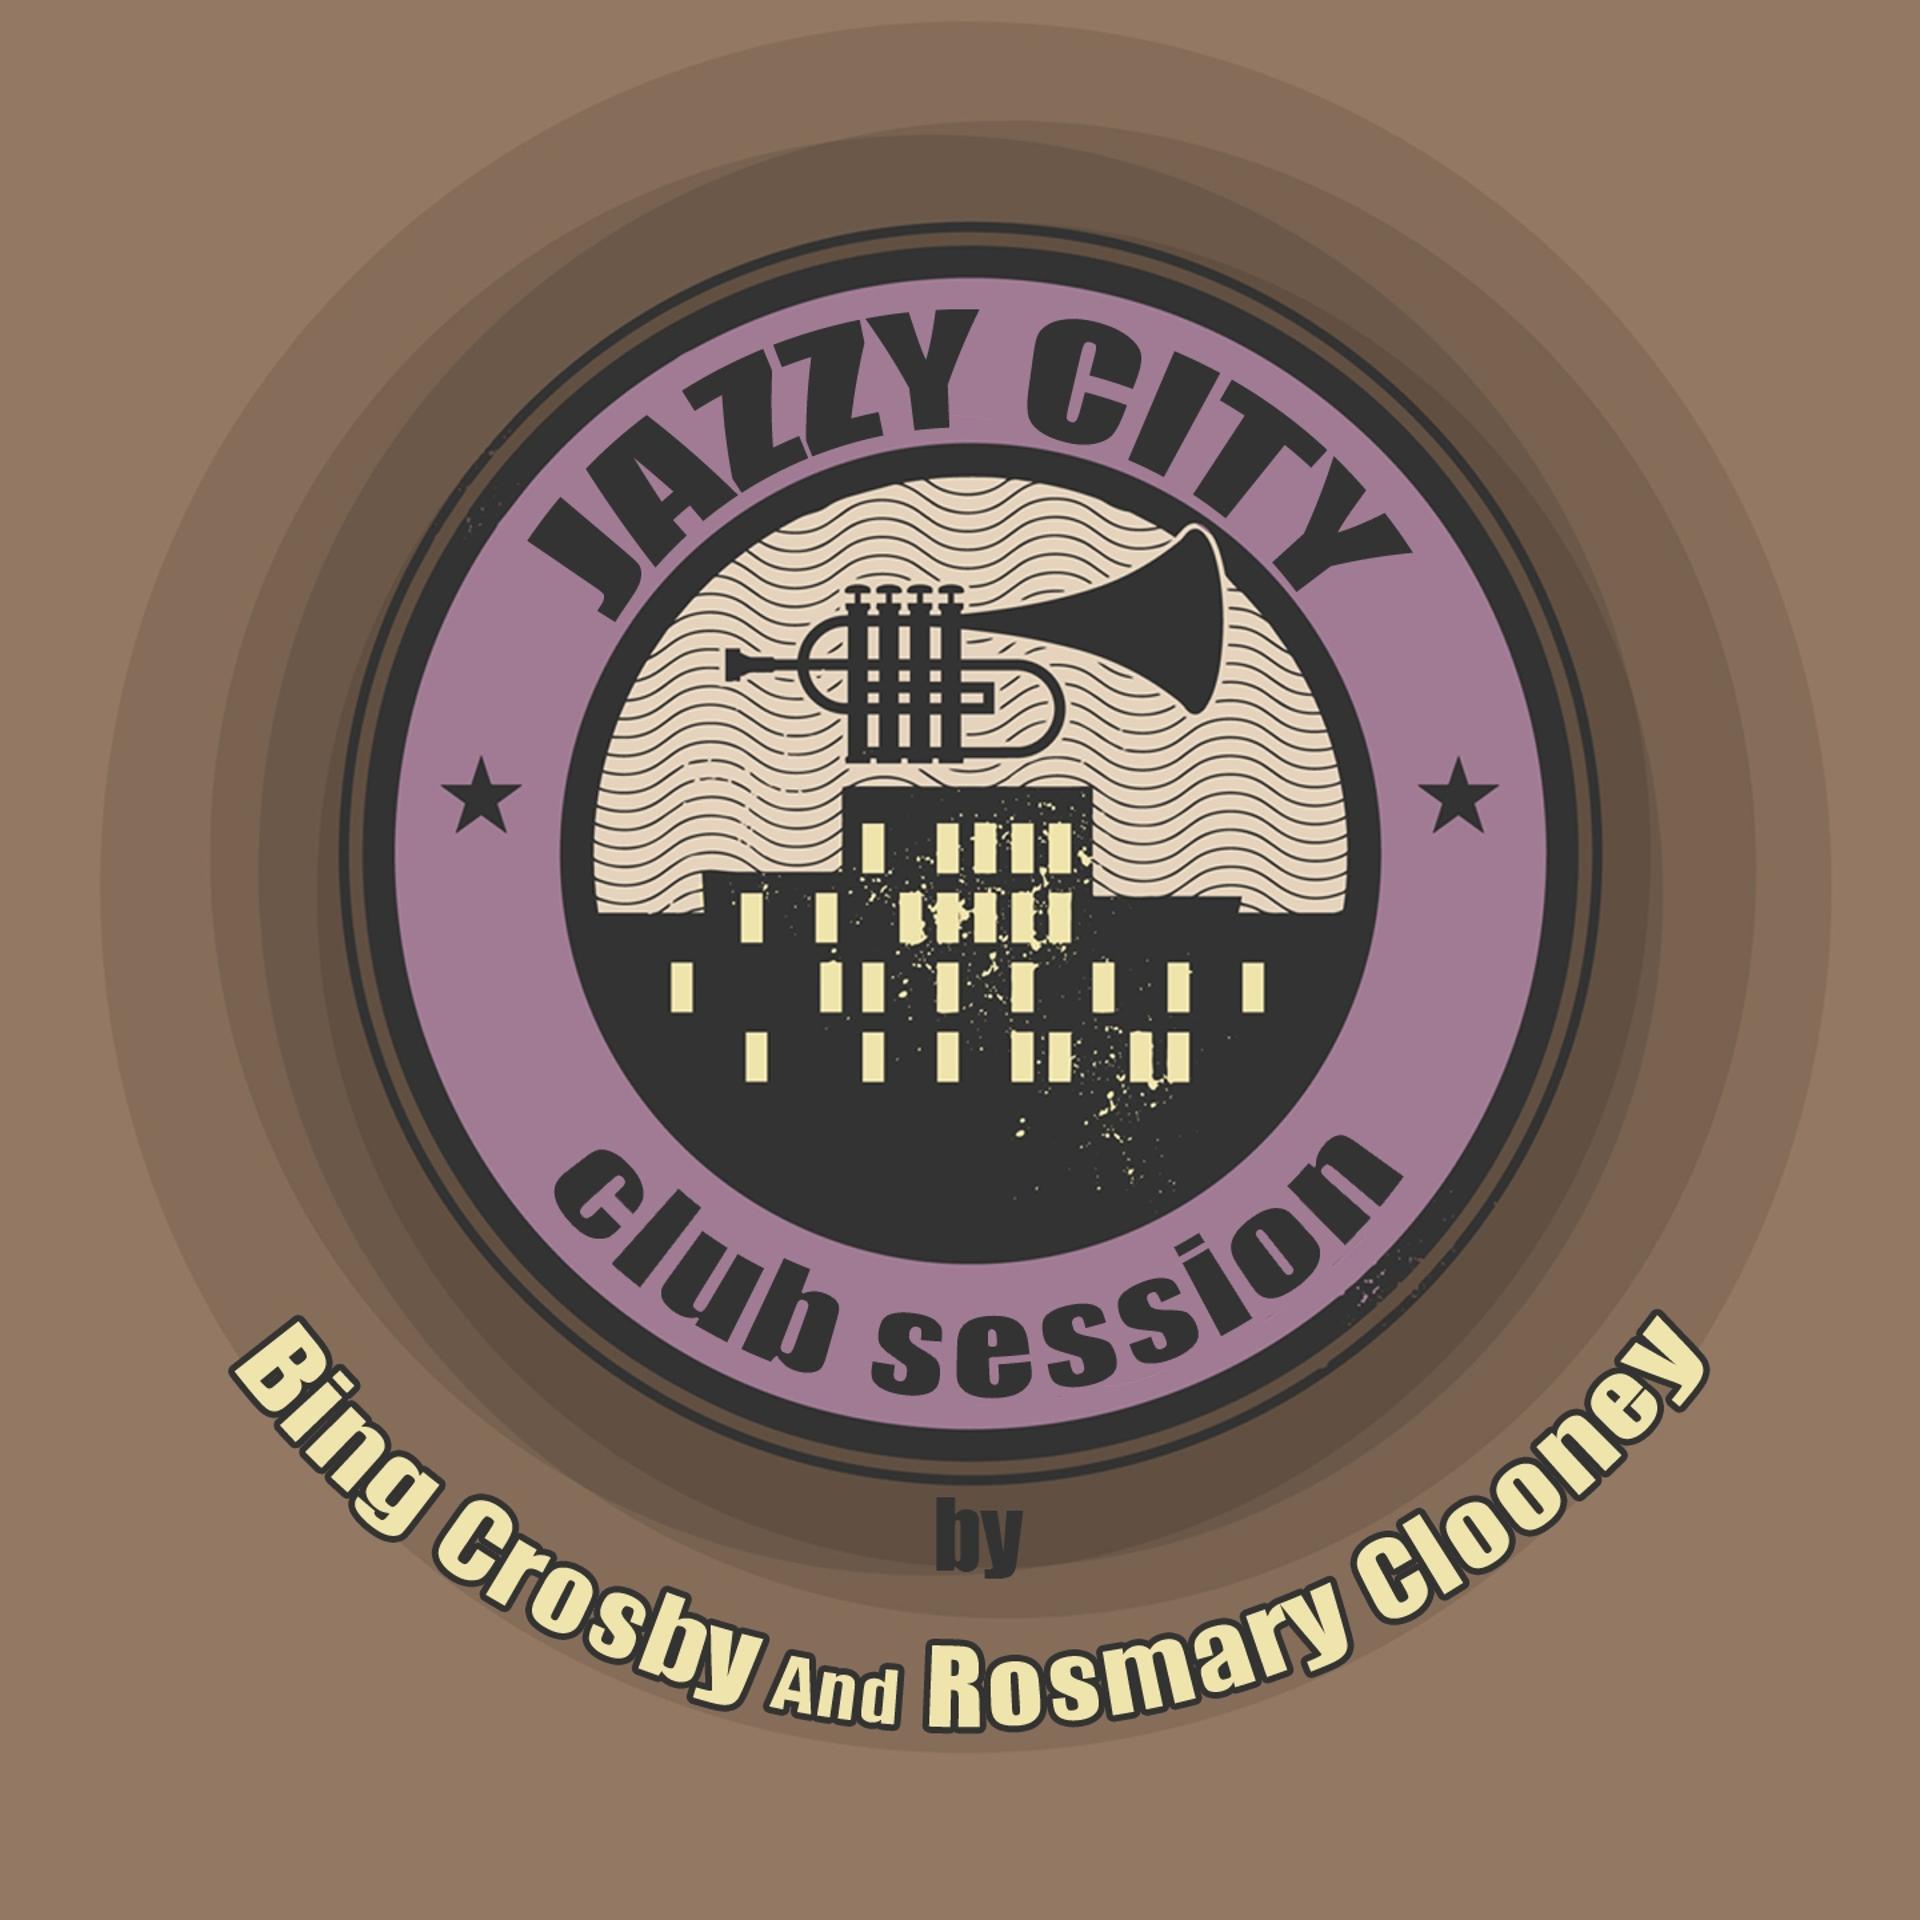 Постер альбома Jazzy City - Club Session by Bing Crosby and Rosmary Clooney